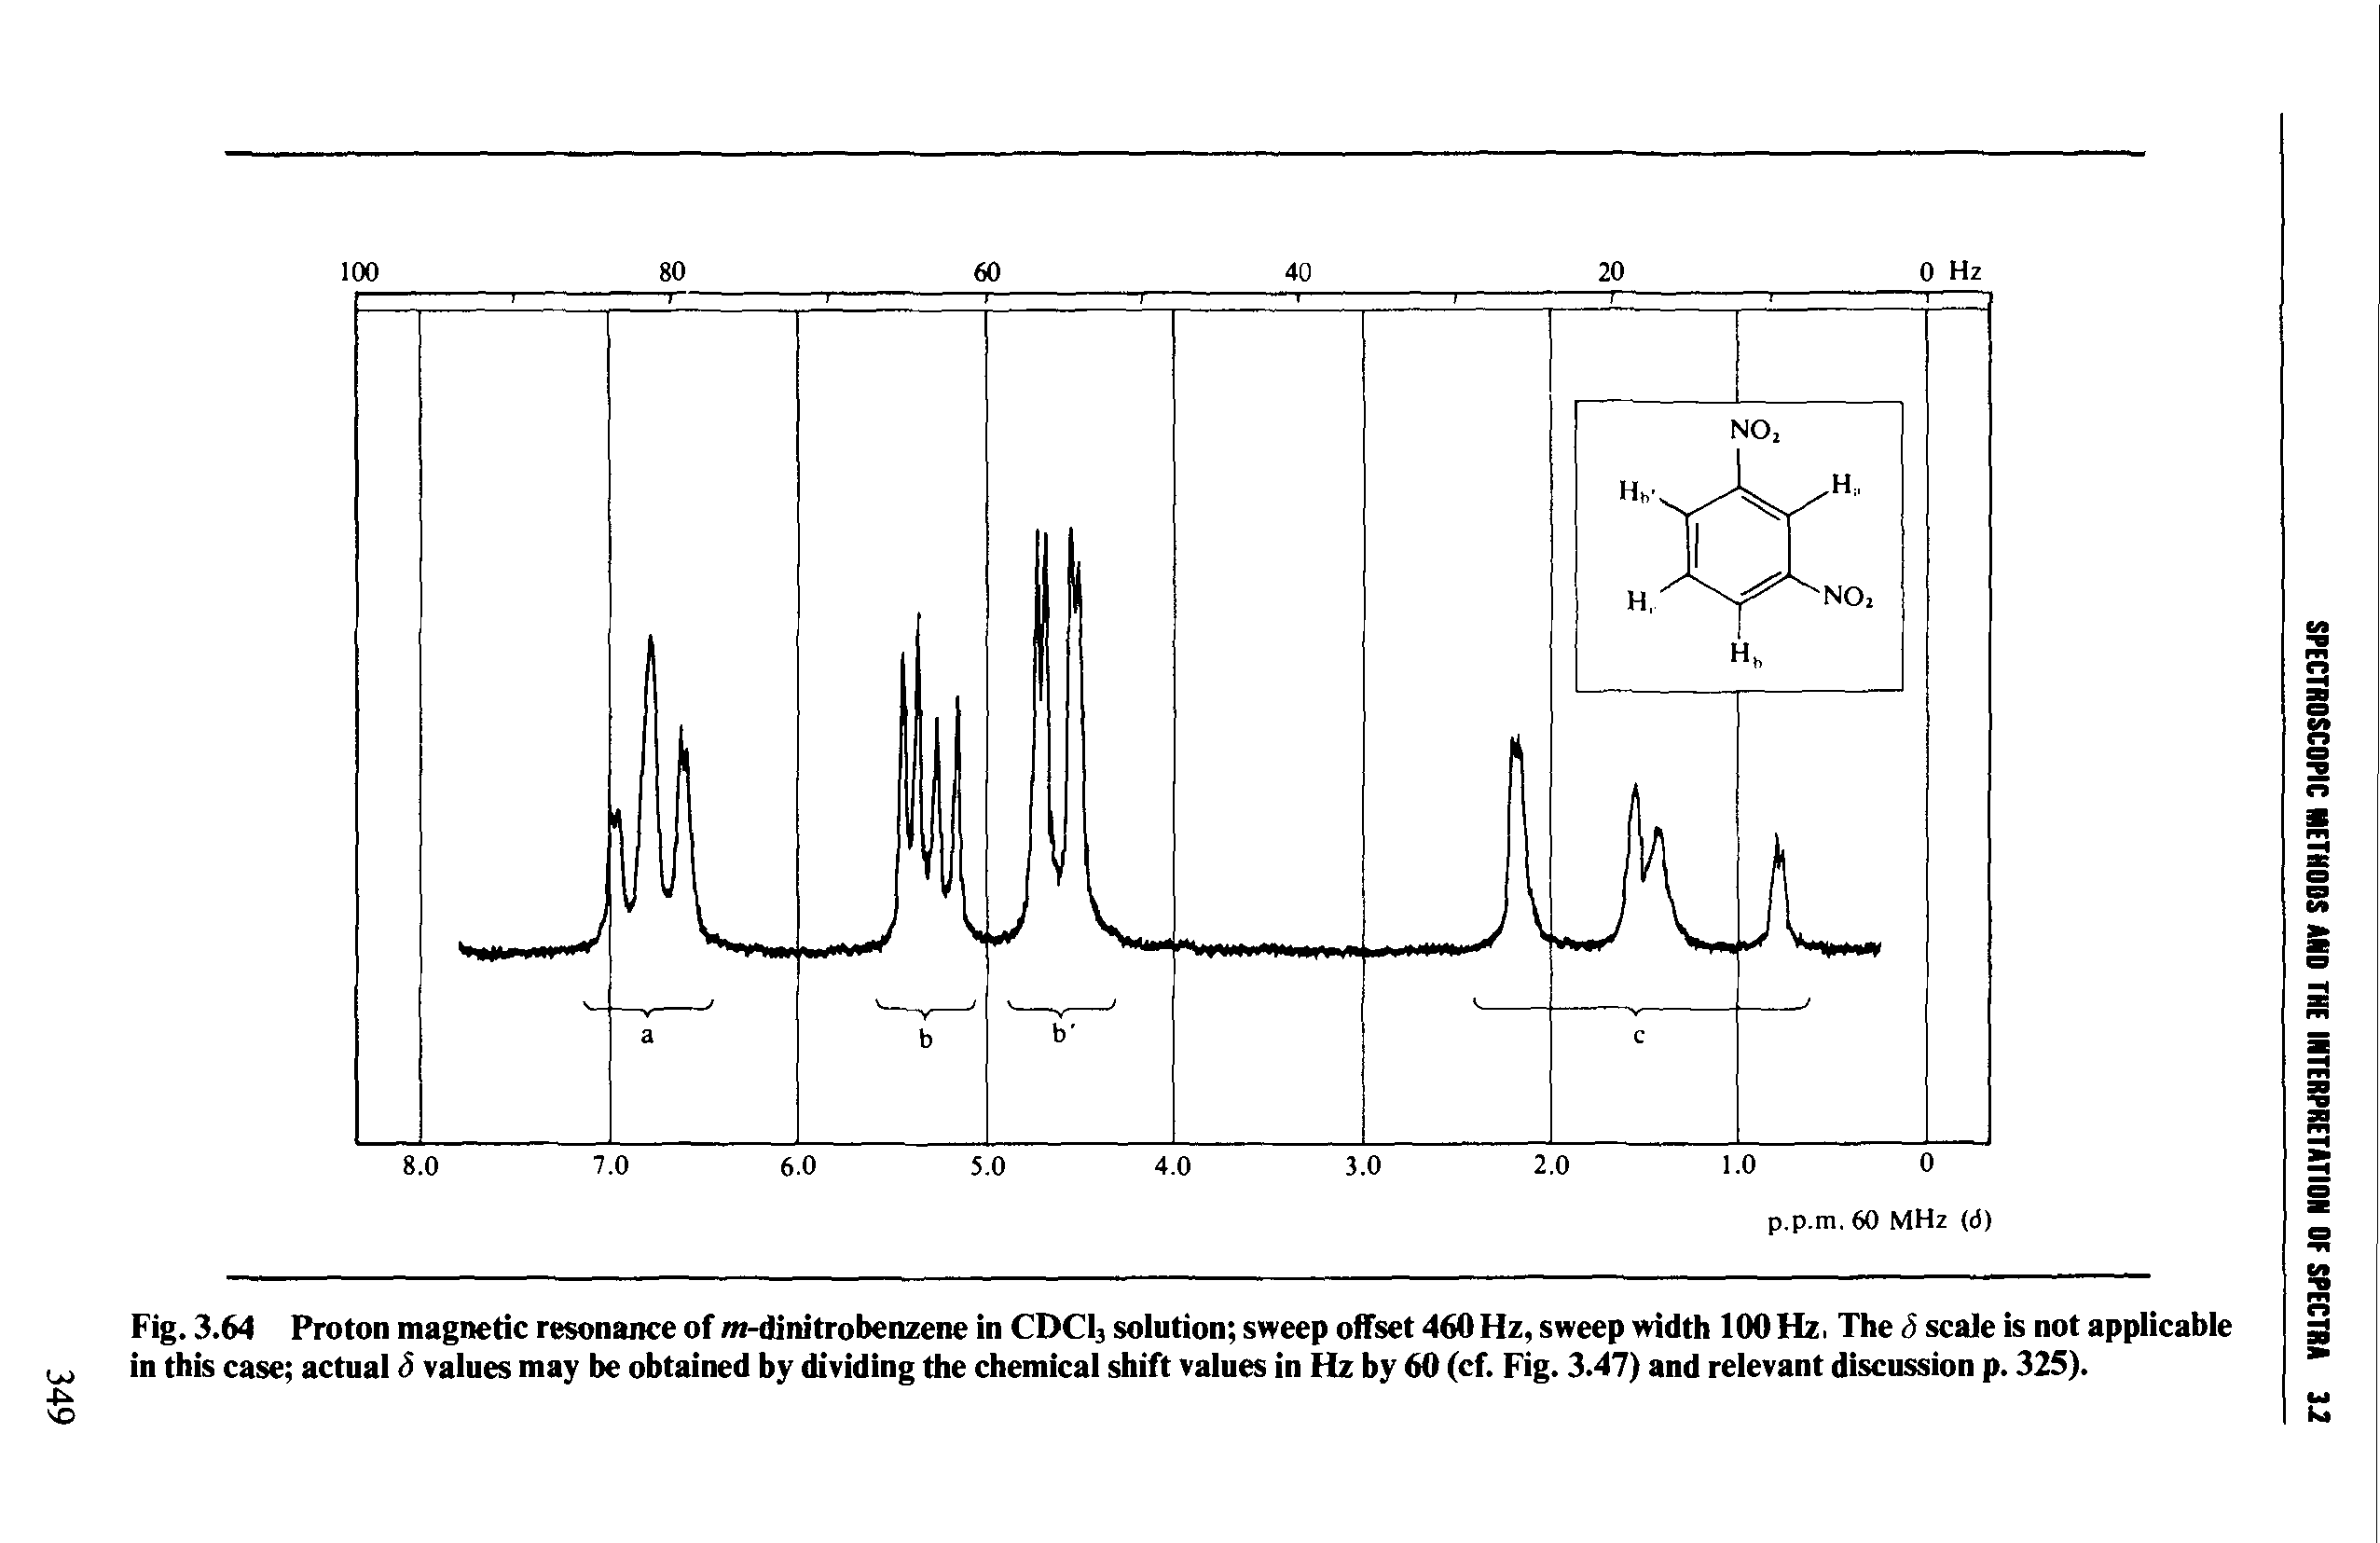 Fig. 3.64 Proton magnetic resonance of m-dinitrobenzene in CDC13 solution sweep offset 460 Hz, sweep width 100 Hz, The <5 scale is not applicable in this case actual S values may be obtained by dividing the chemical shift values in Hz by 60 (cf. Fig. 3.47) and relevant discussion p. 325).